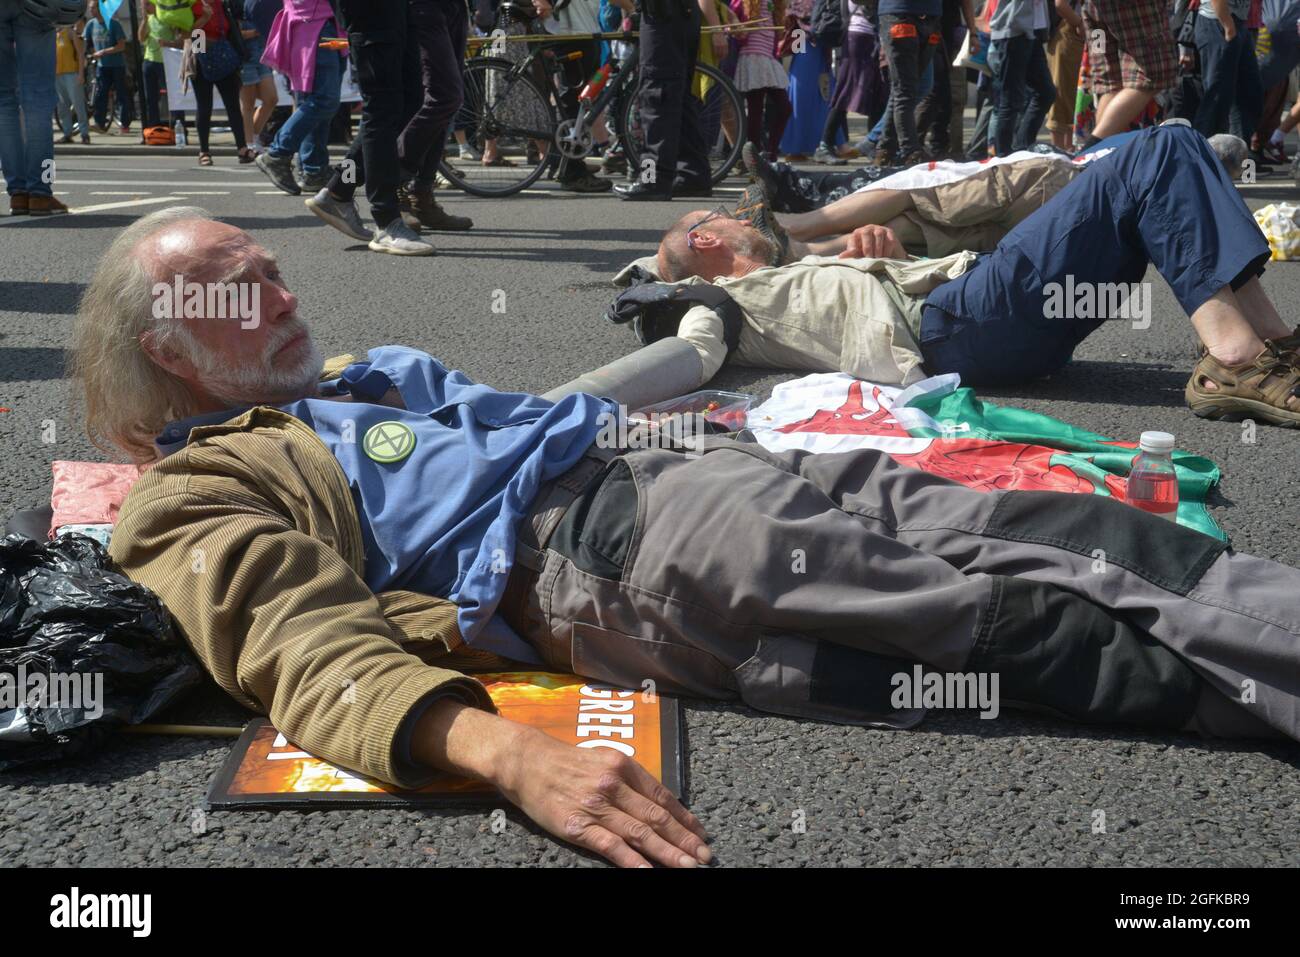 Activists chained together, during the demonstration. Climate change activists from Extinction Rebellion demonstrate at Parliament Street, Westminster Stock Photo